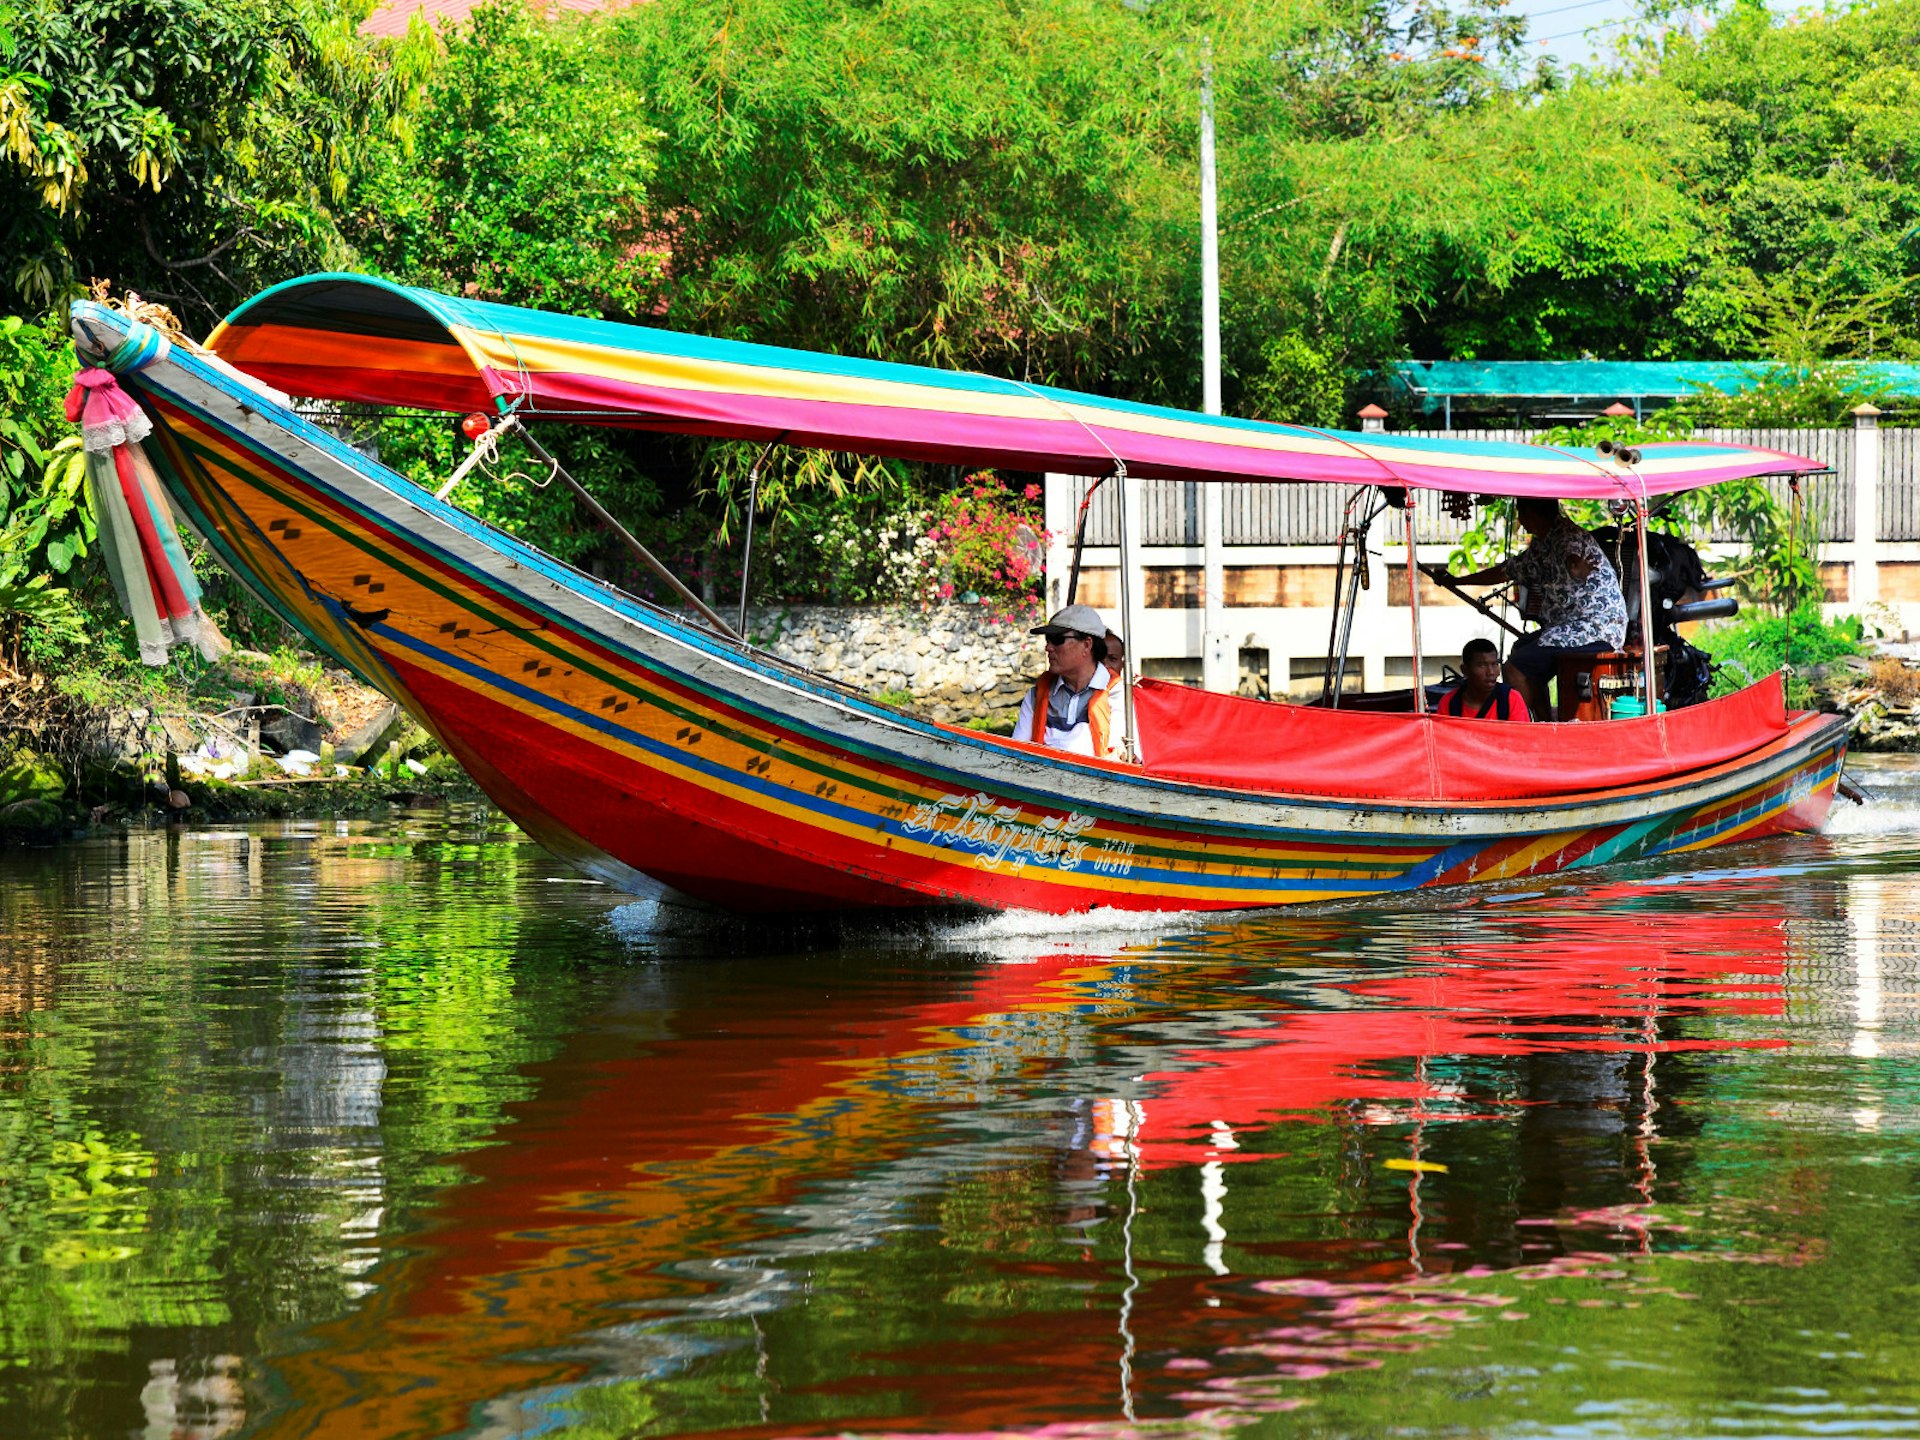 A colourful longtail boat with passengers on one of Bangkok's waterways backed by greenery.